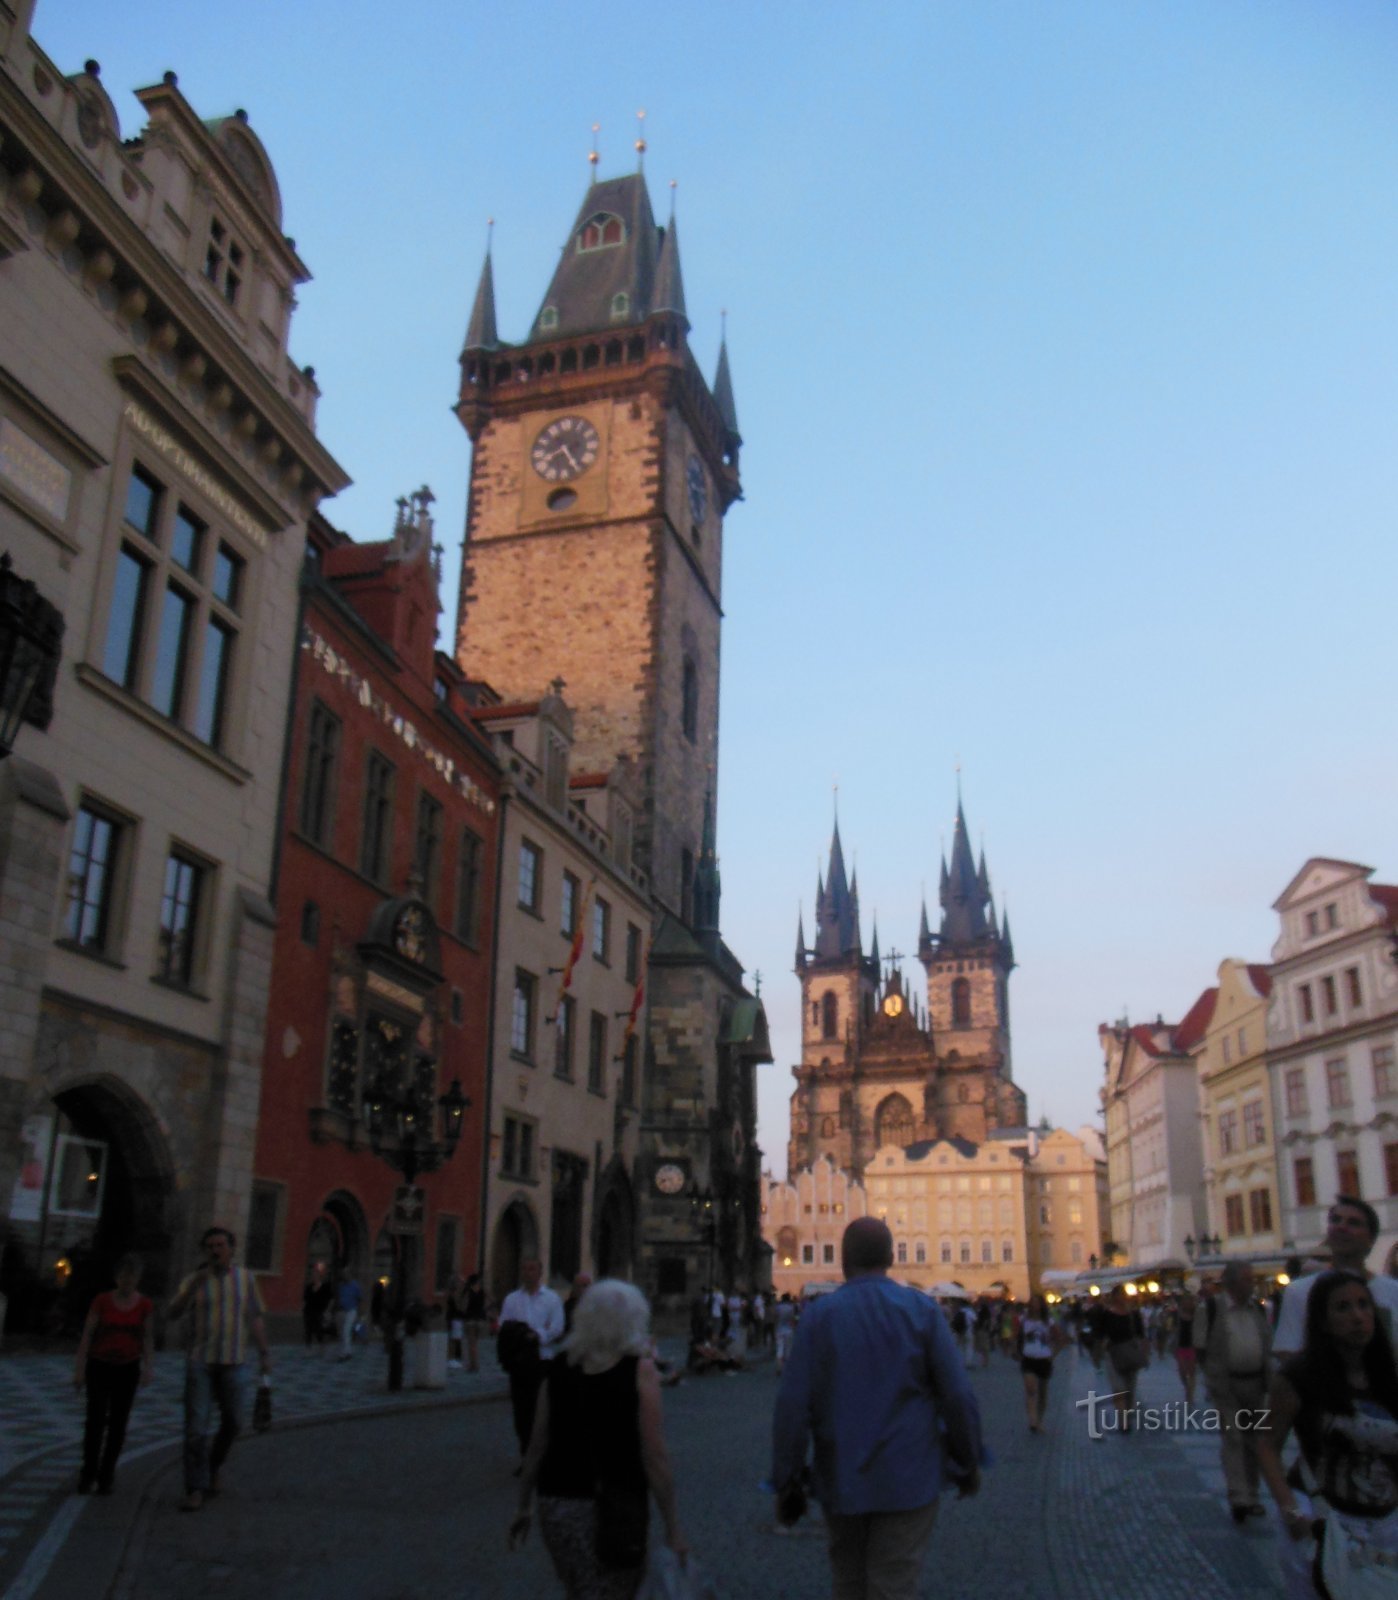 Týn Church, Old Town Hall with astronomical clock